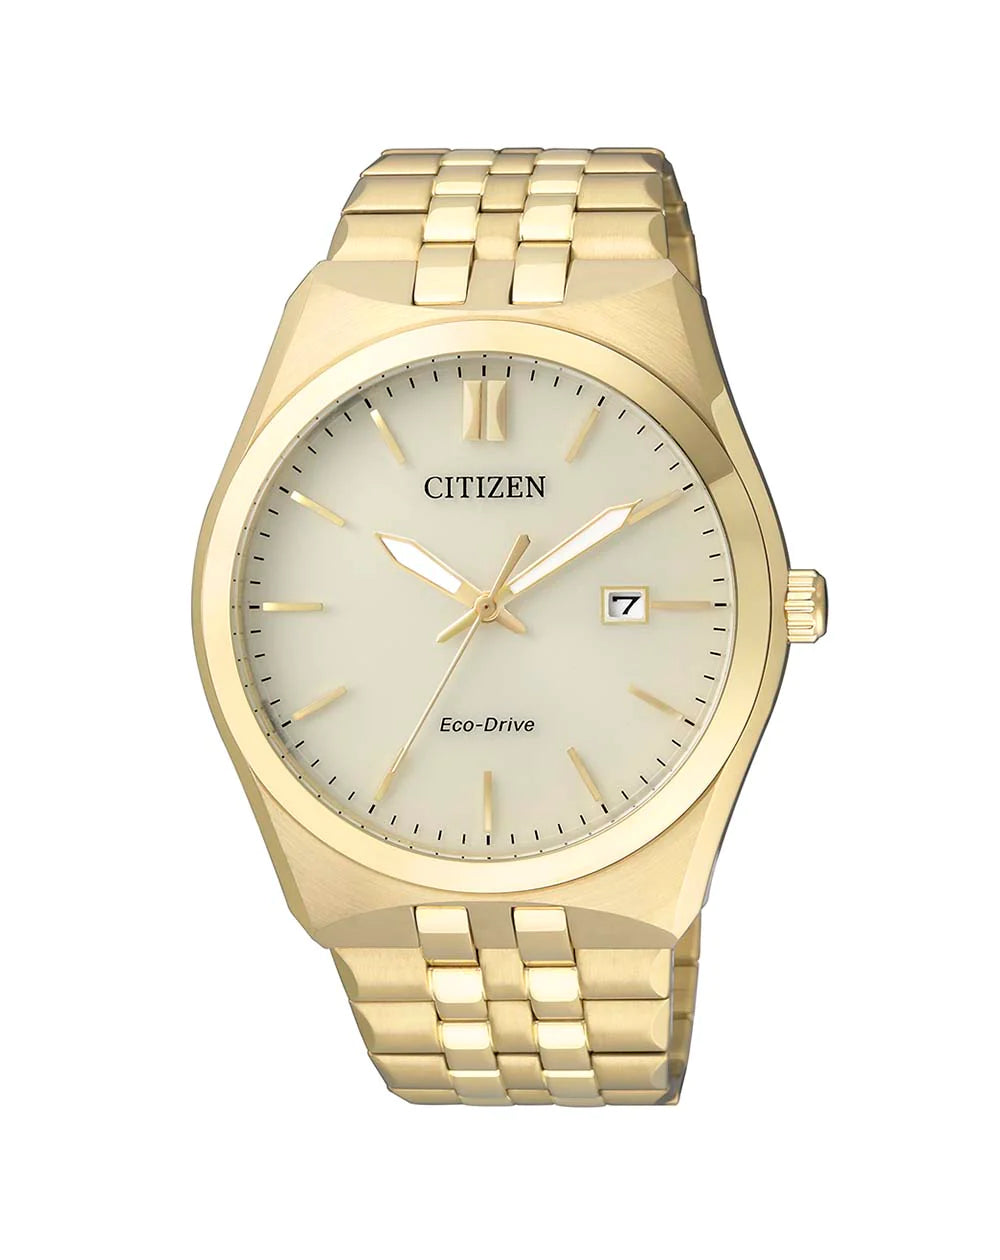 Gold and Cream Citizen Eco Drive Watch